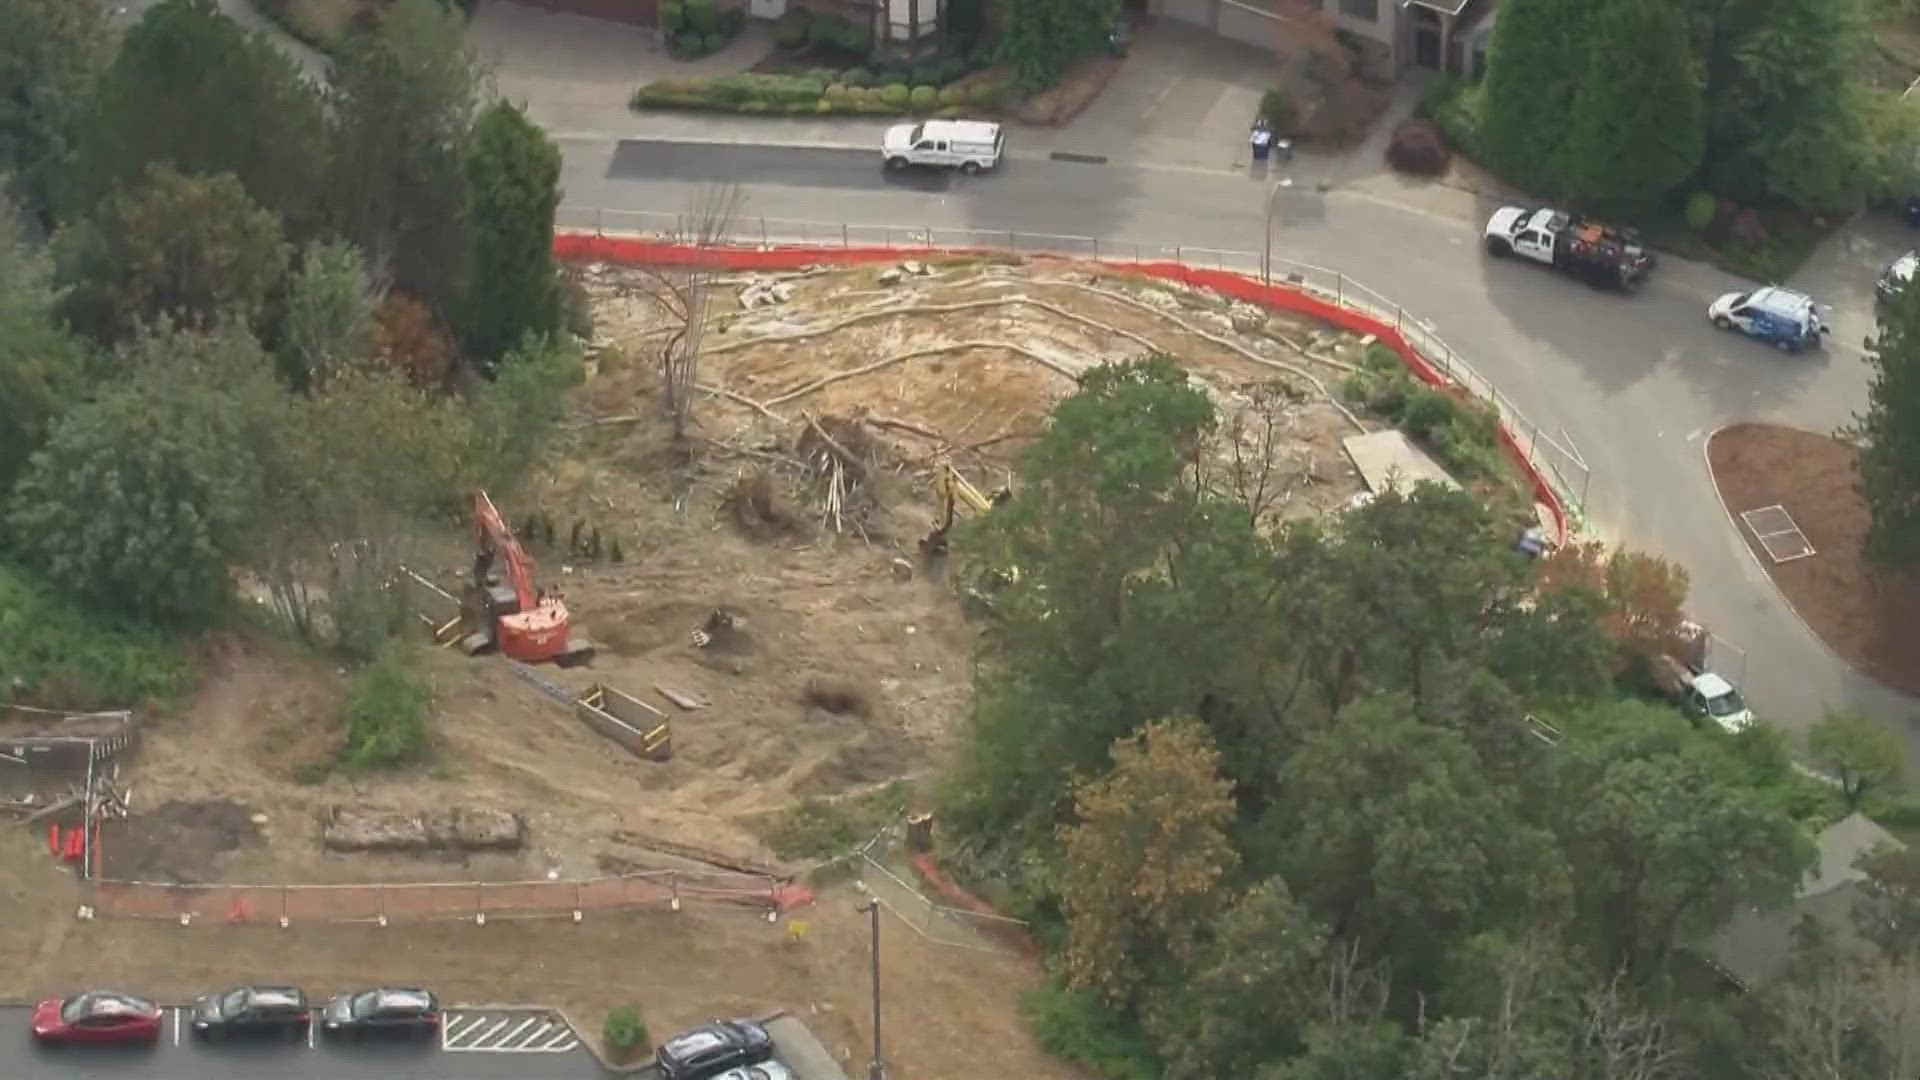 Crews excavated a water pipe Thursday that caused a mudslide earlier this year when it burst, leading to the demolition of a Bellevue family's home.